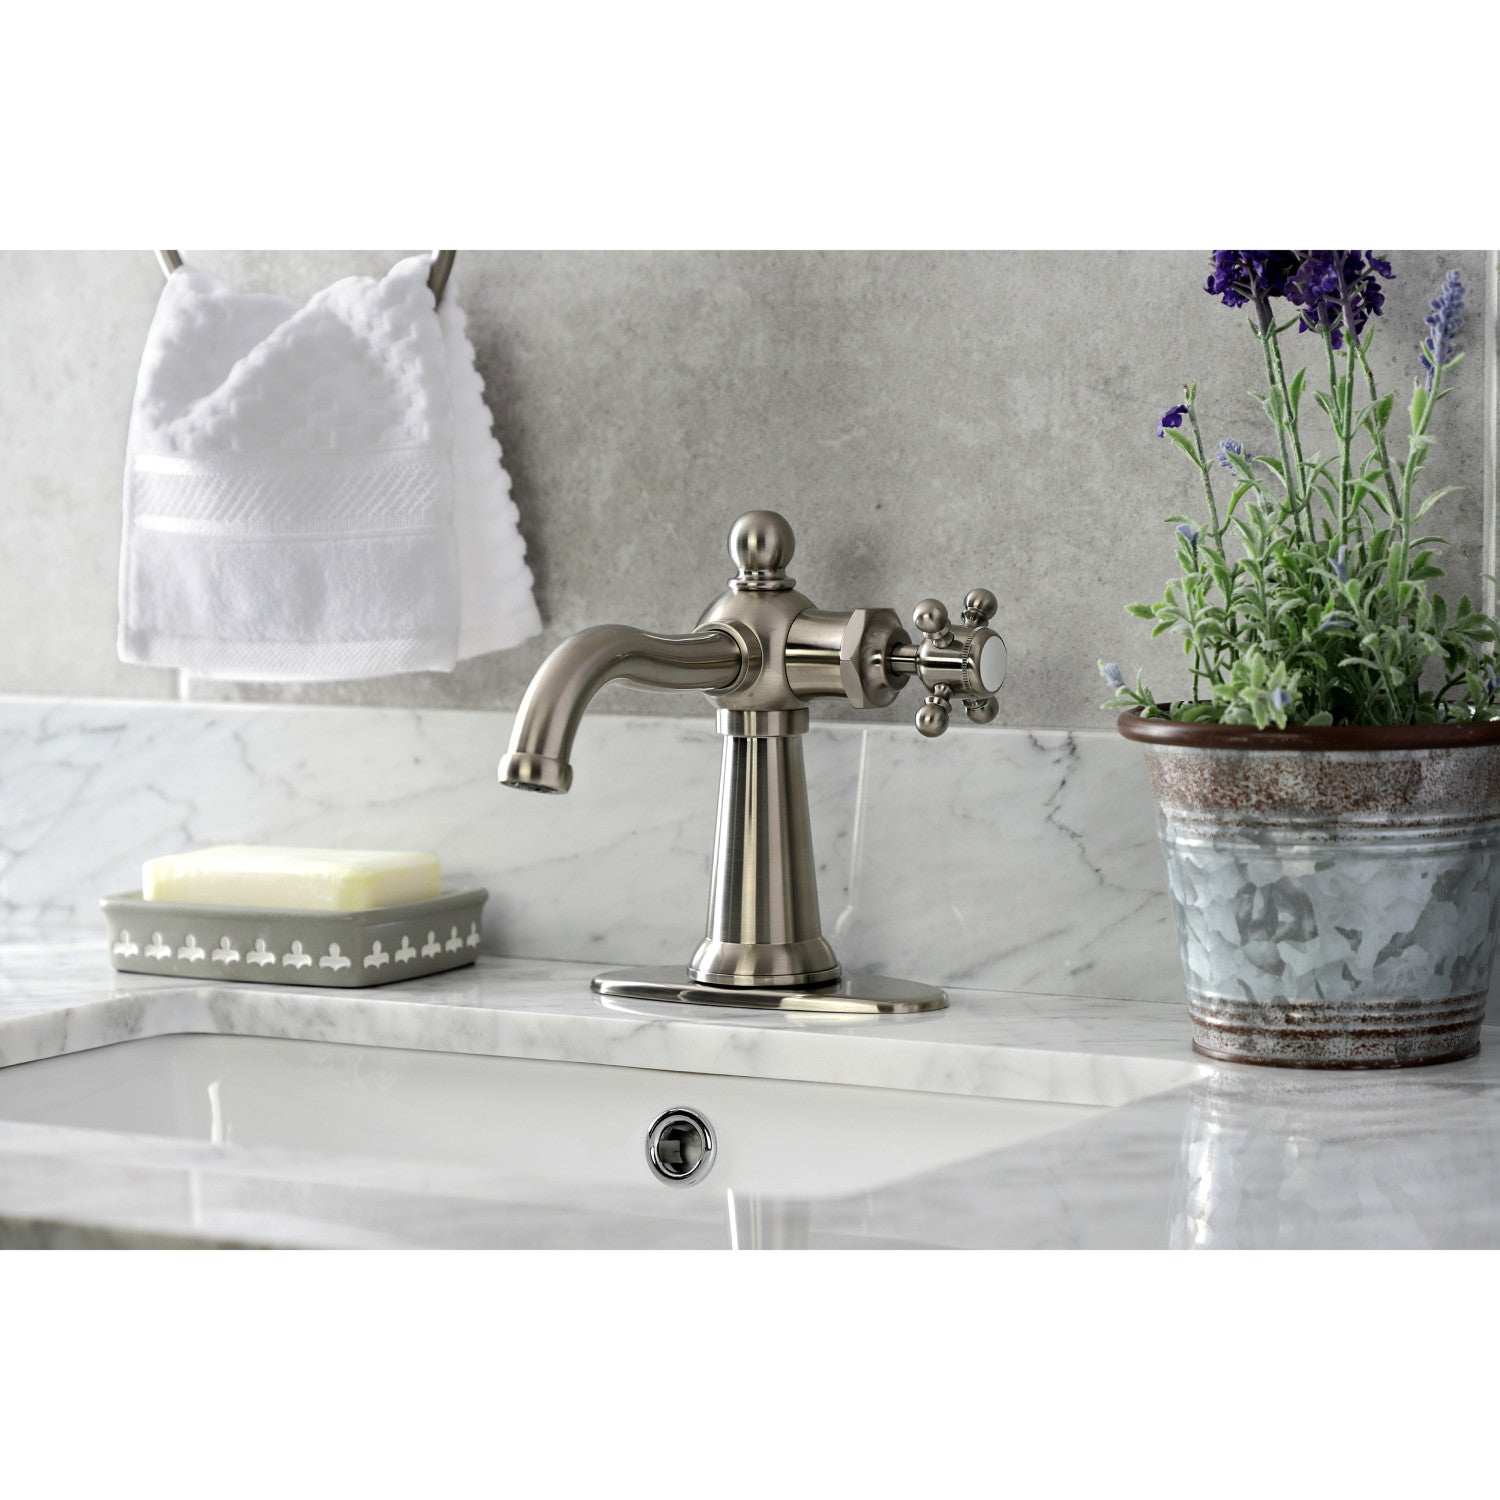 Kingston Brass Nautical Single-Handle Single Hole Bathroom Faucet in  Antique Brass HKSD154BXAB - The Home Depot